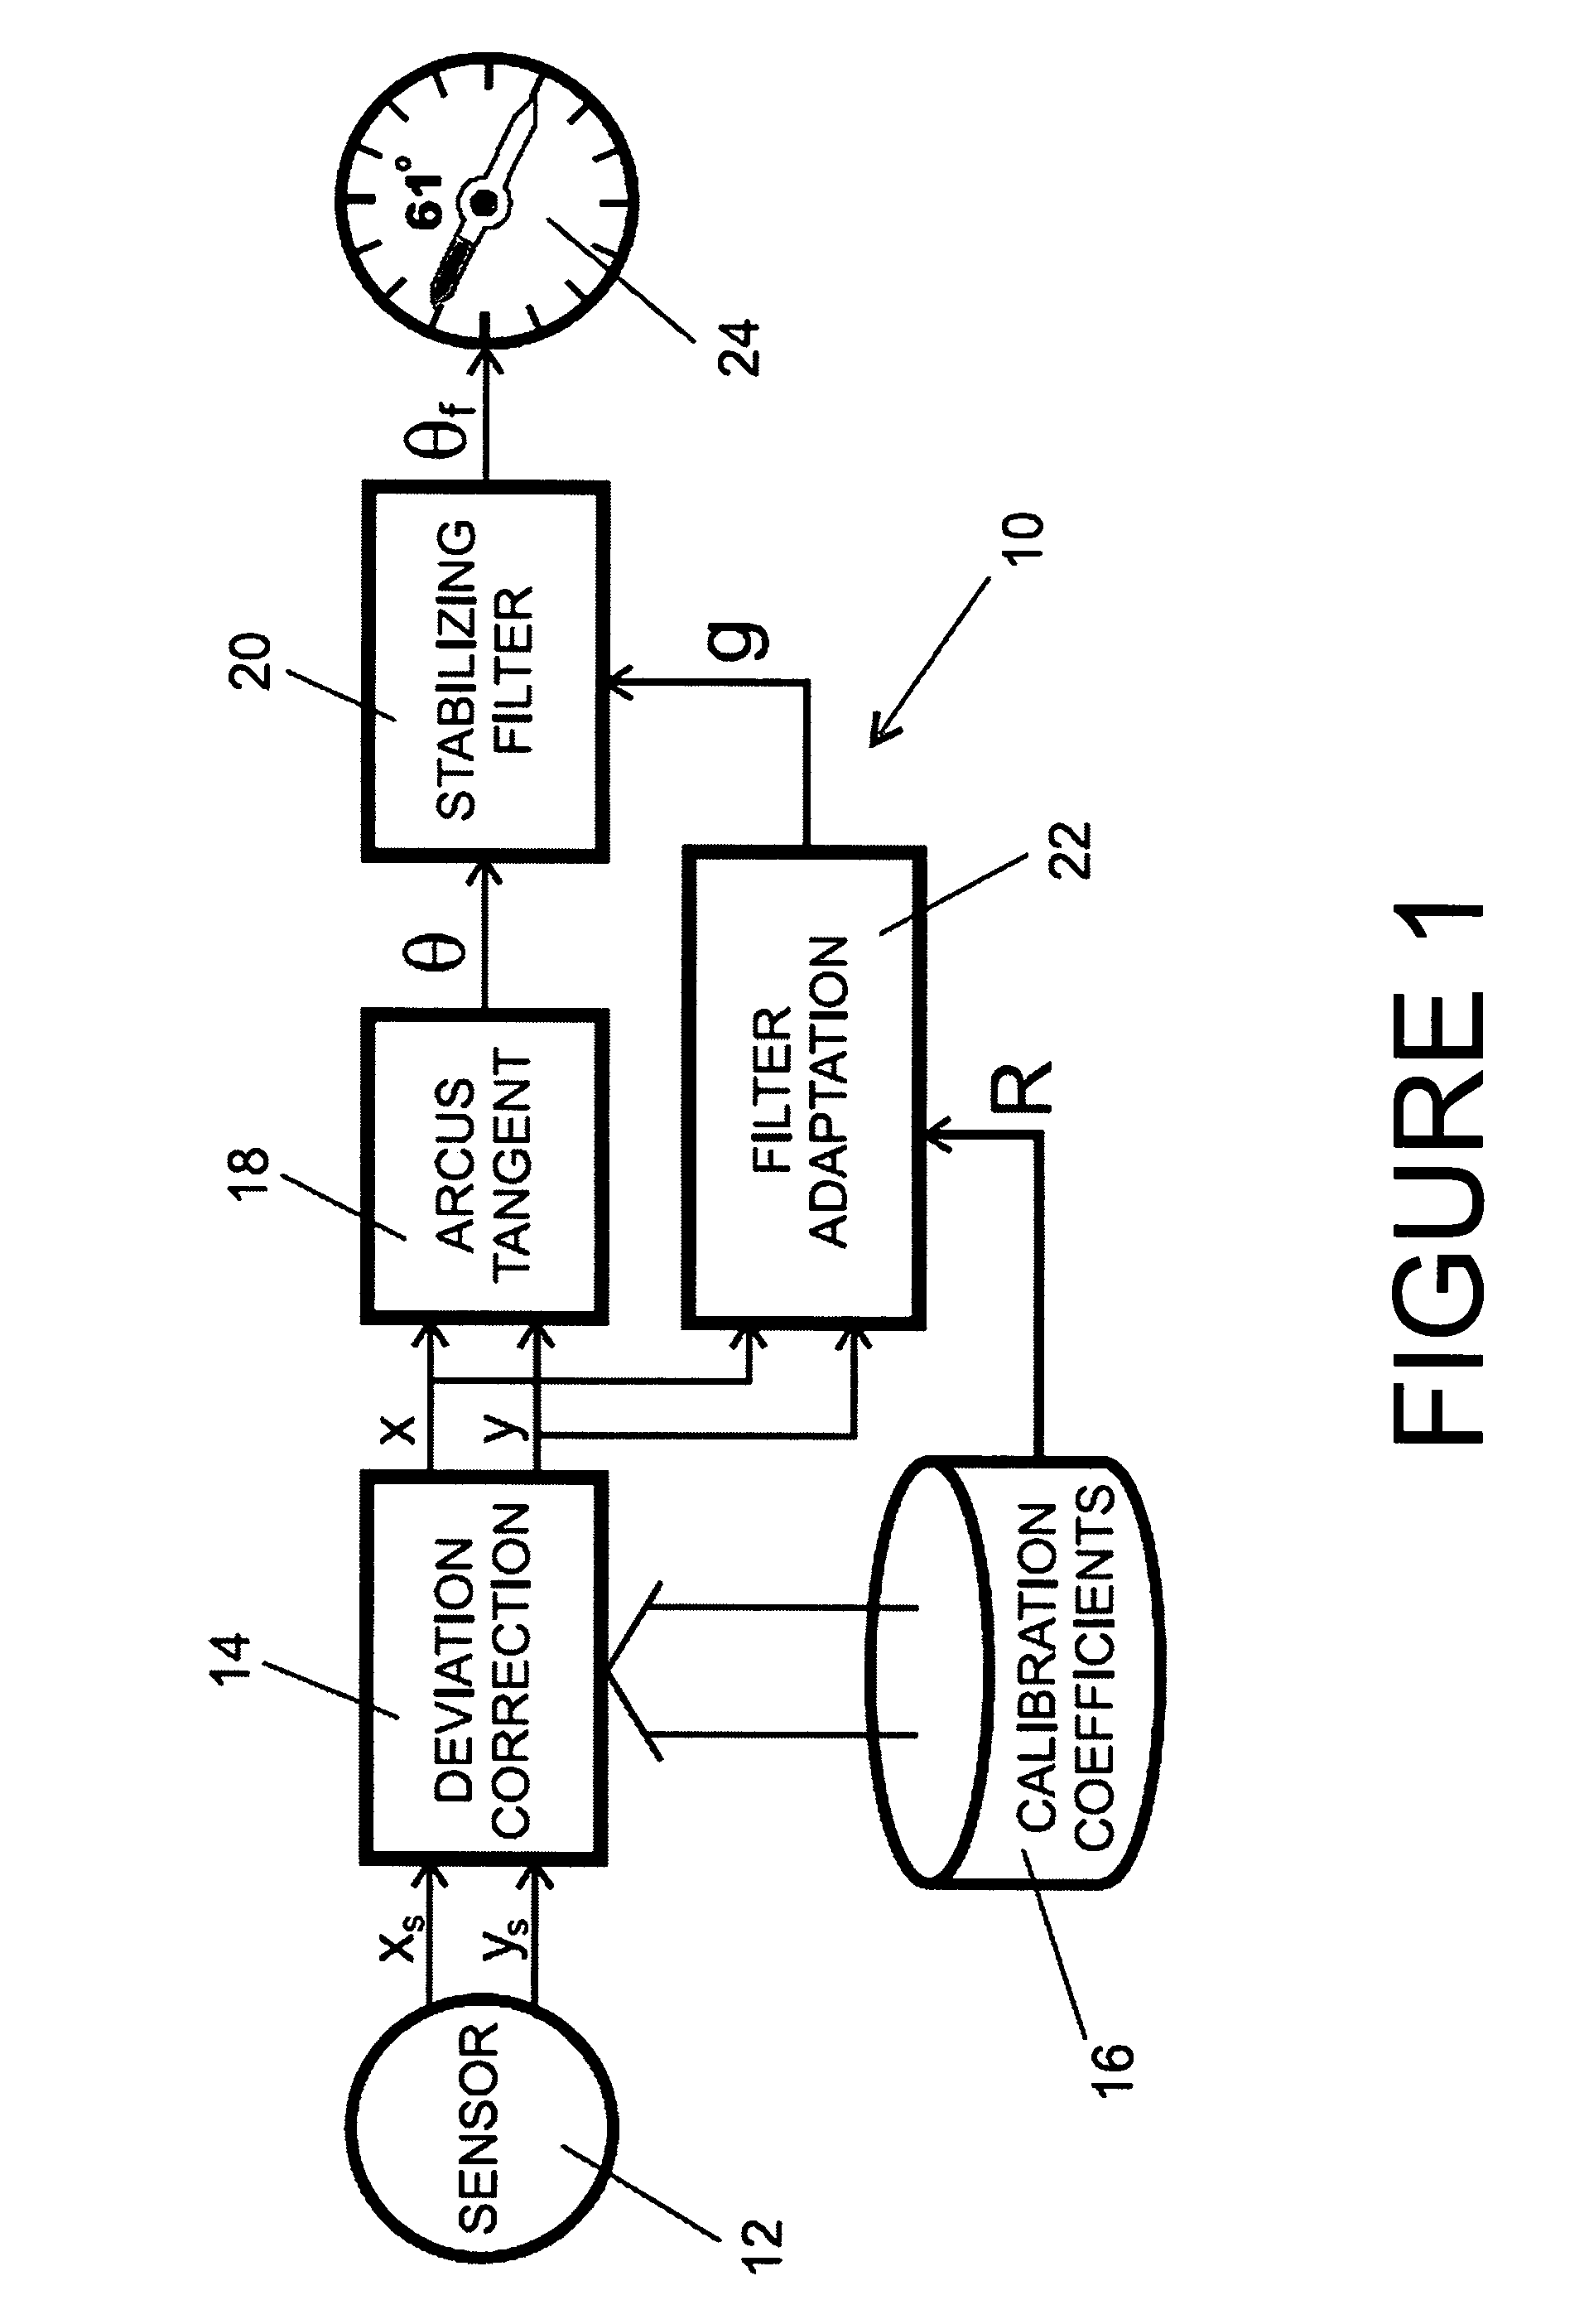 System, method, device and computer code product for improving the readability of an electronic compass